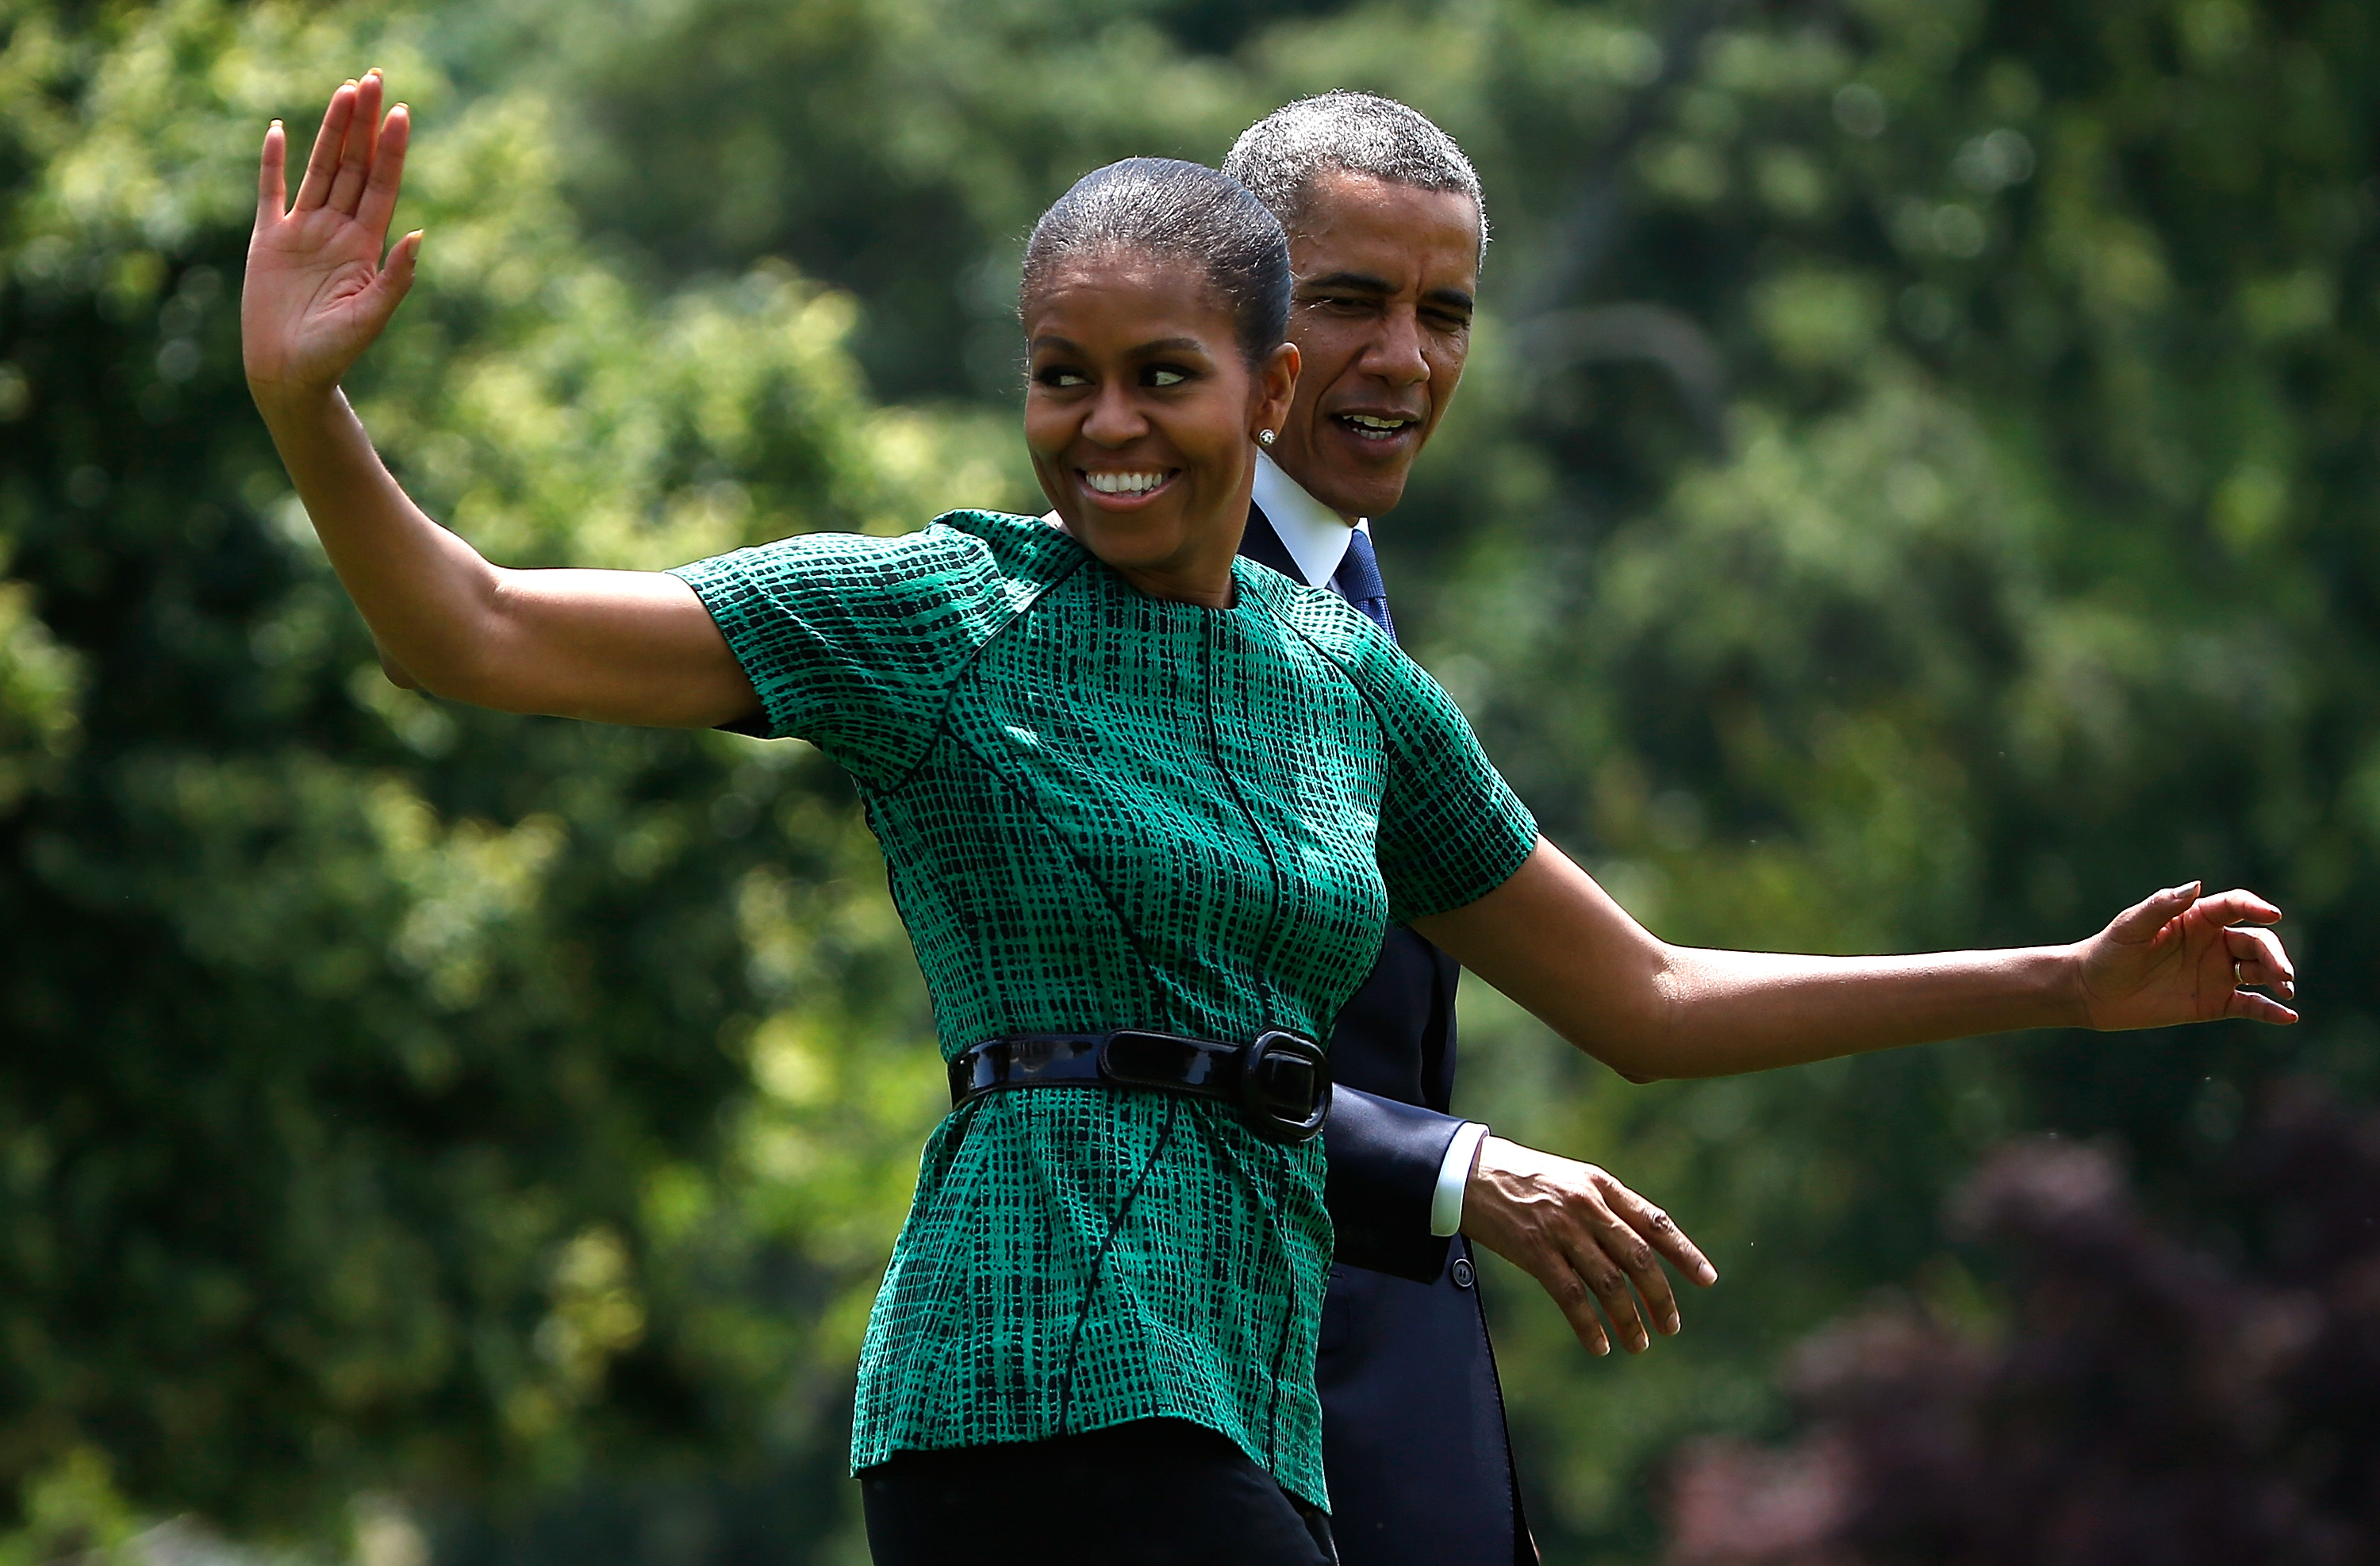 First lady Michelle Obama and U.S. President Barack Obama wave (Win McNamee—Getty Images)